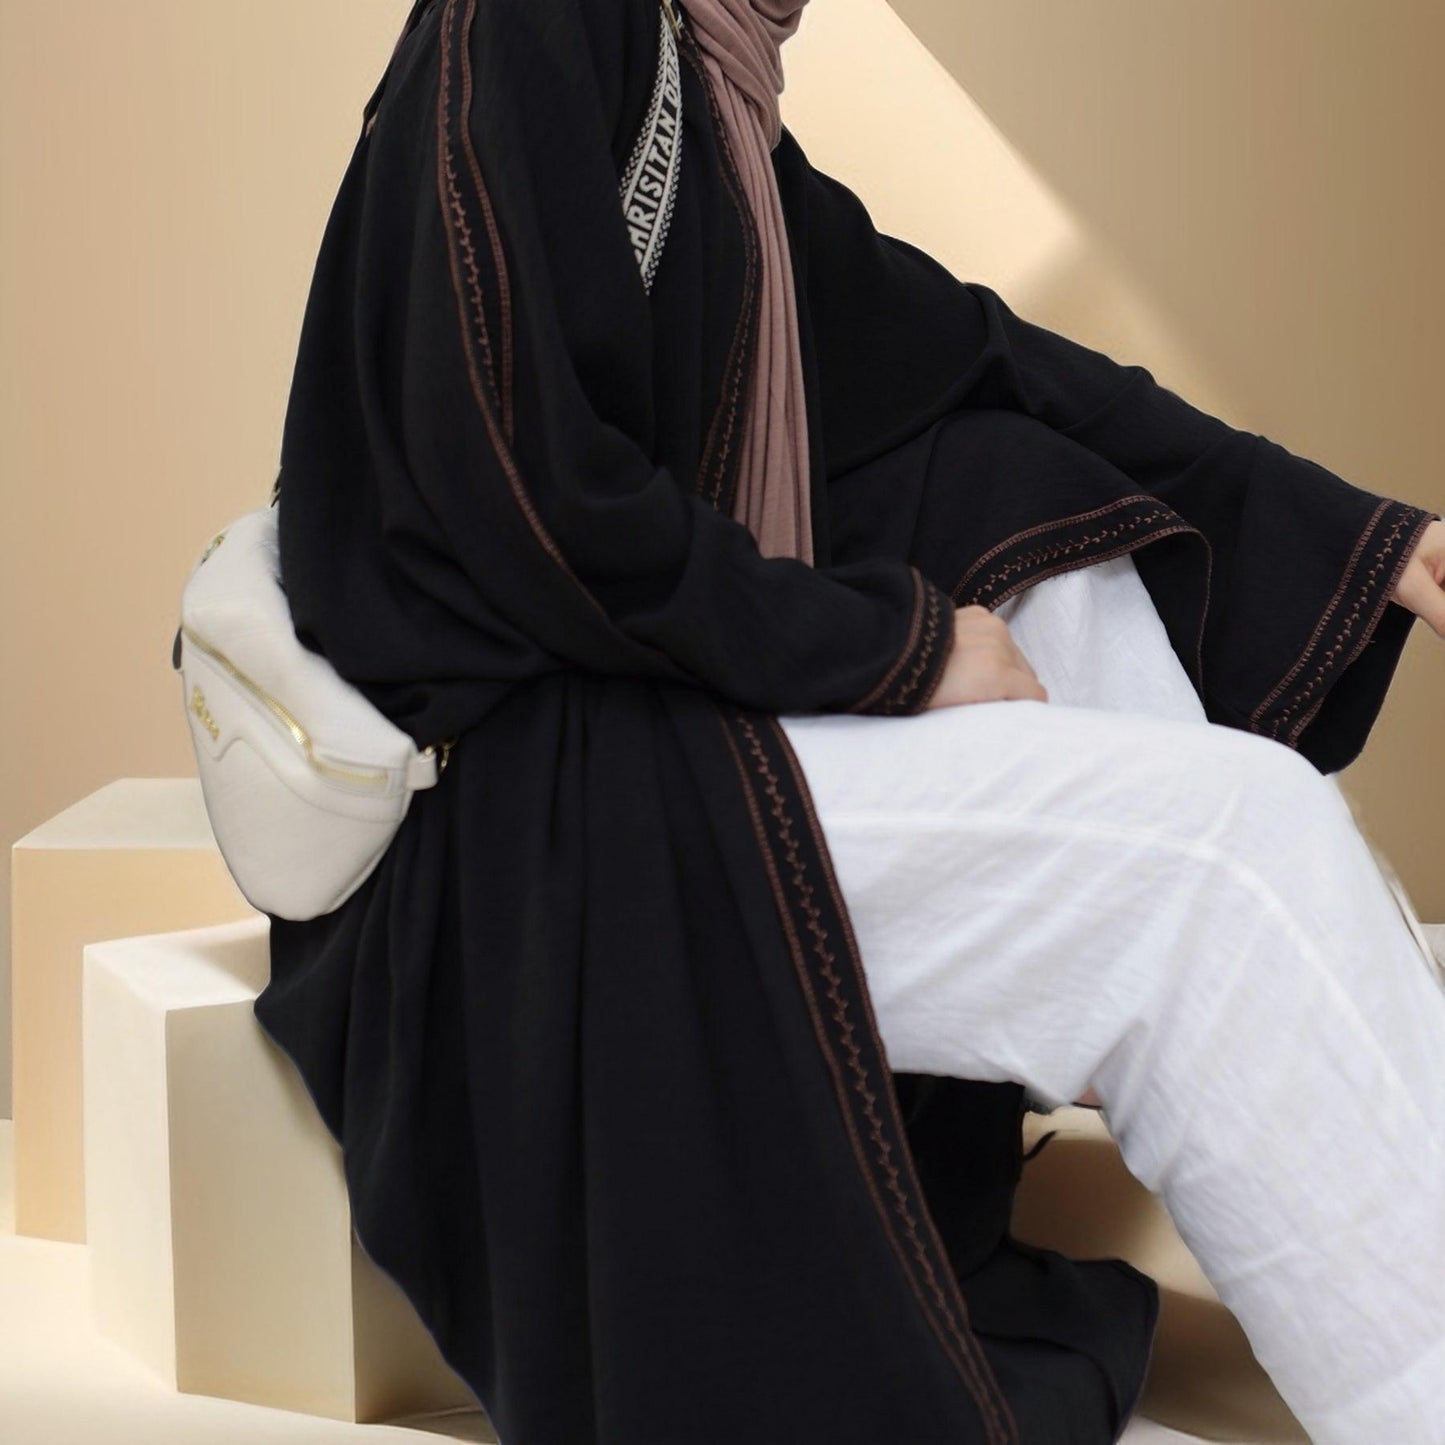 Exquisite Embroidered Lace Dress Abaya/Robe - Try Modest Limited 